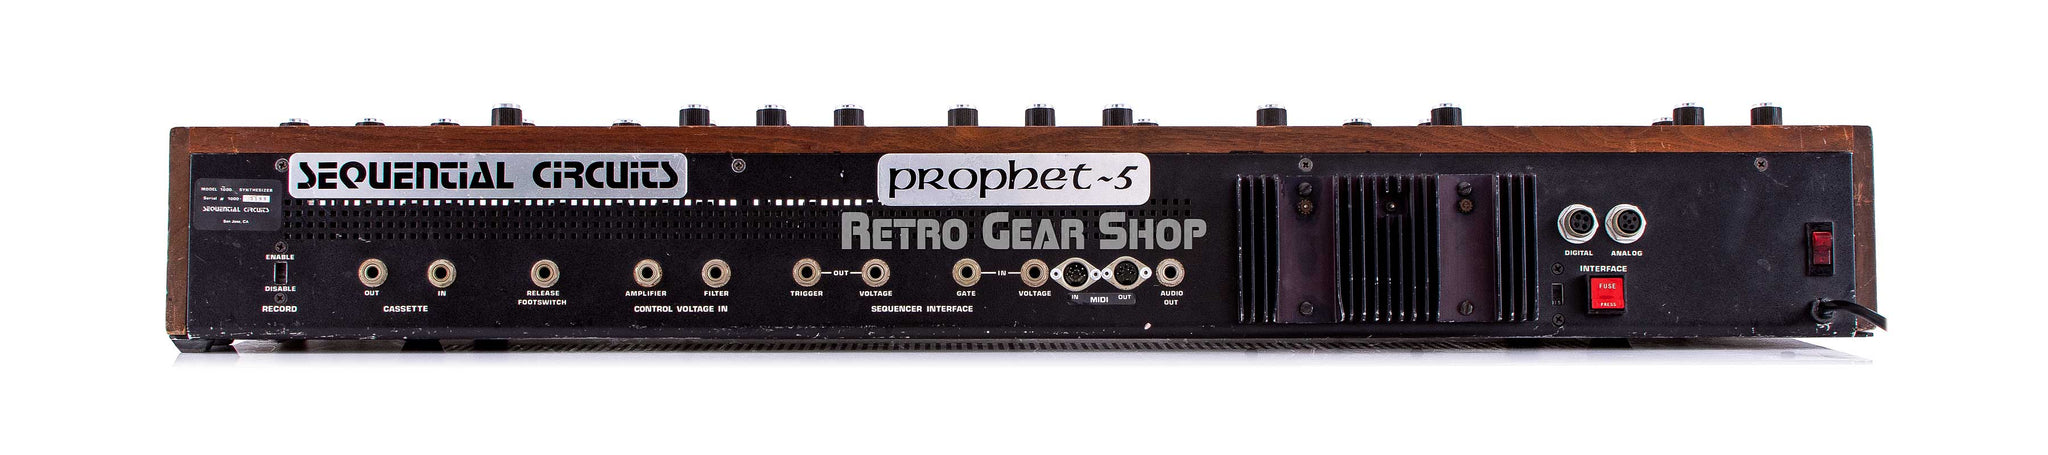 Sequential Circuits Prophet 5 Rear